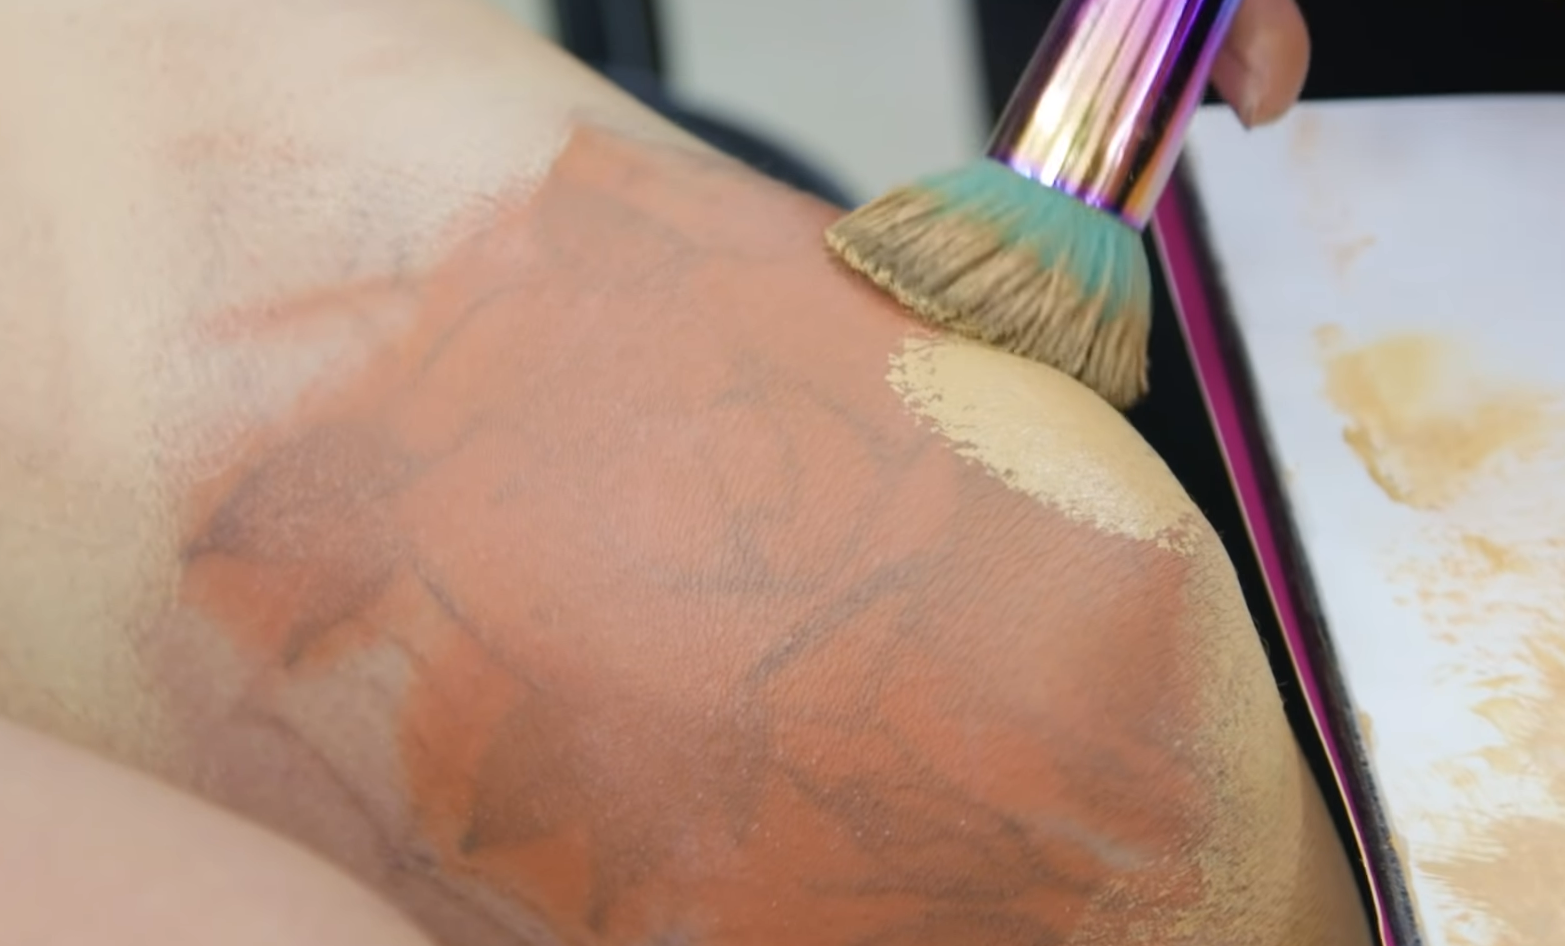 How to Cover Up a Tattoo with Makeup